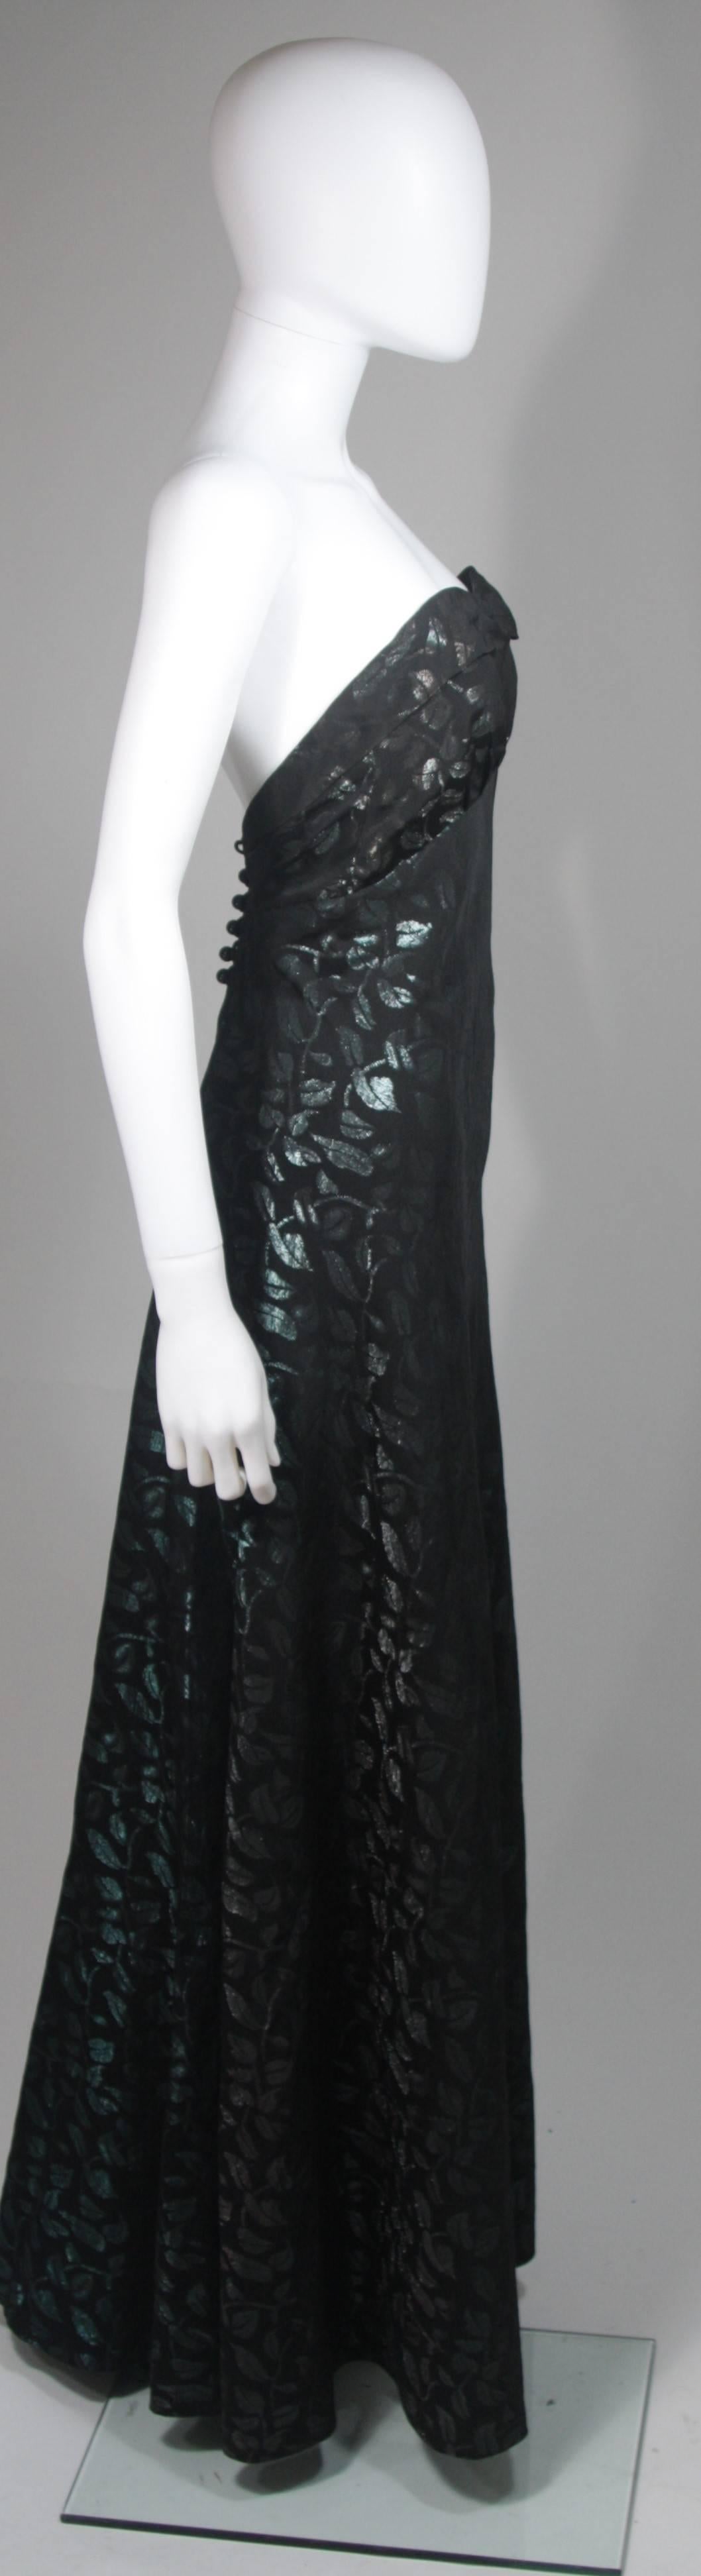 Vintage 1950s Black Evening Gown with Iridescent Green & Blue Leaf Pattern In Excellent Condition For Sale In Los Angeles, CA